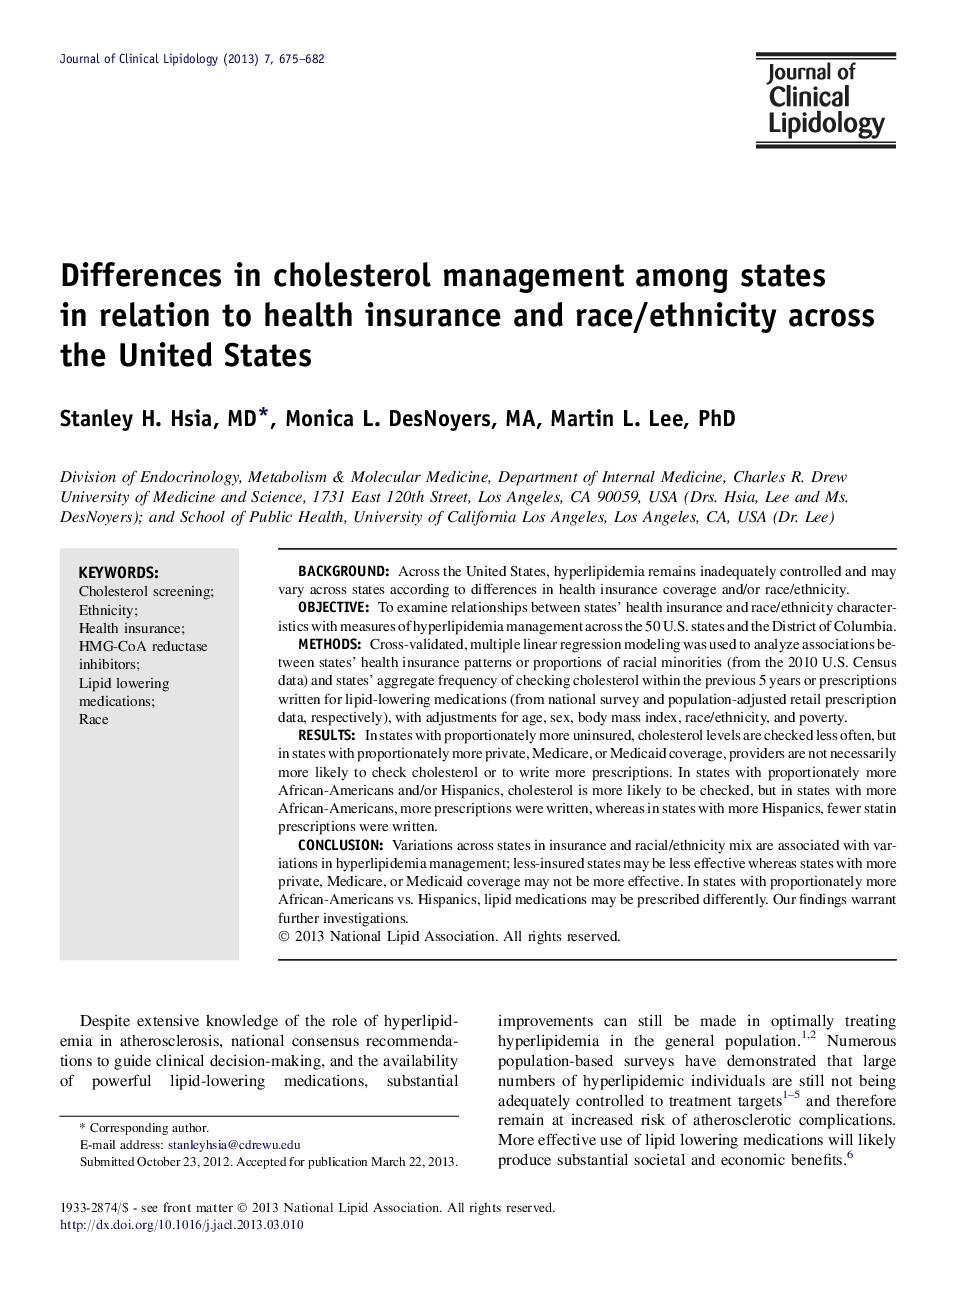 Differences in cholesterol management among states in relation to health insurance and race/ethnicity across the United States